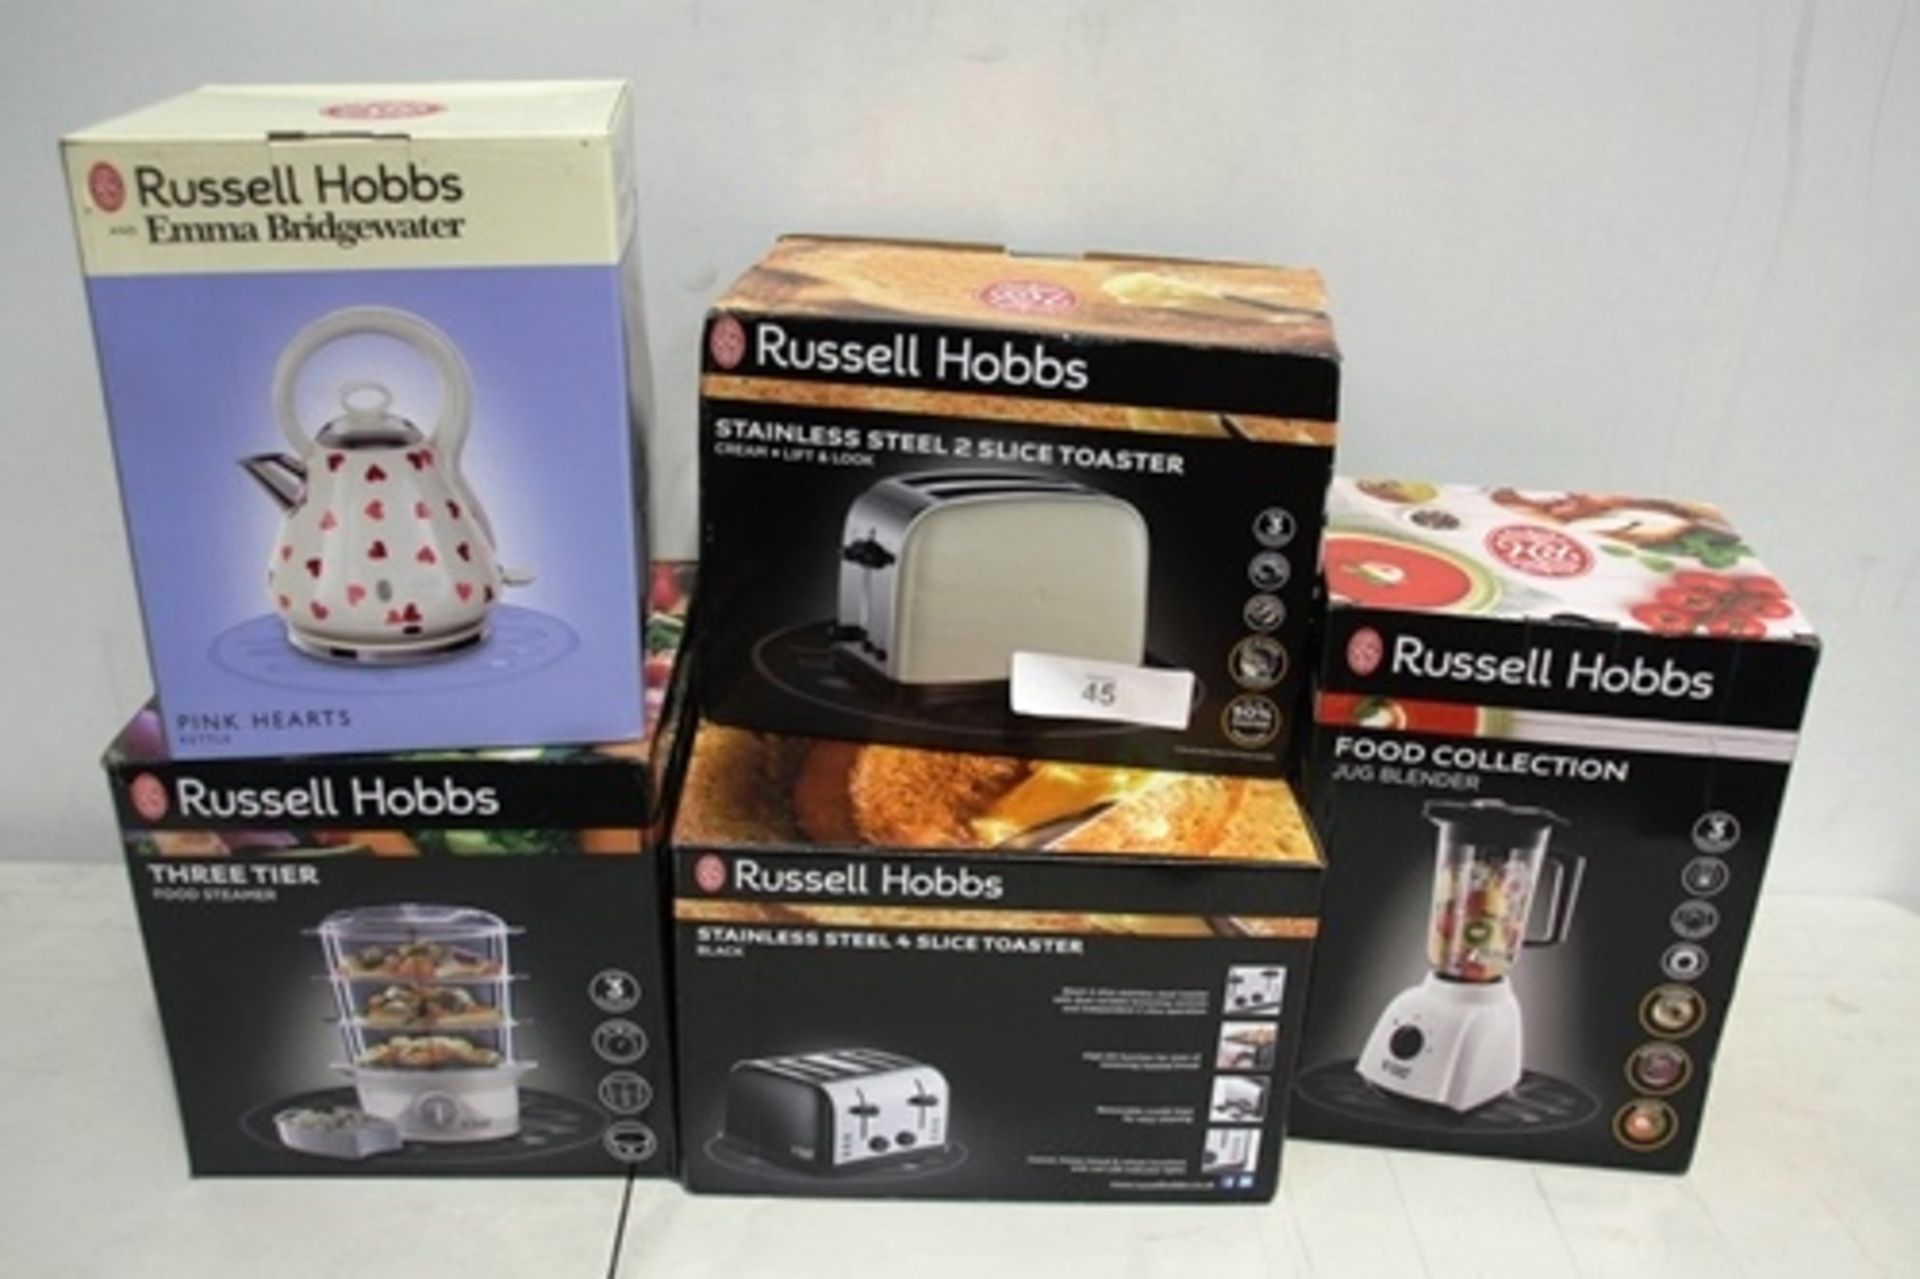 5 x Russell Hobbs products comprising 2 x toasters, 1 x jug blender, 1 x steamer and 1 x kettle -